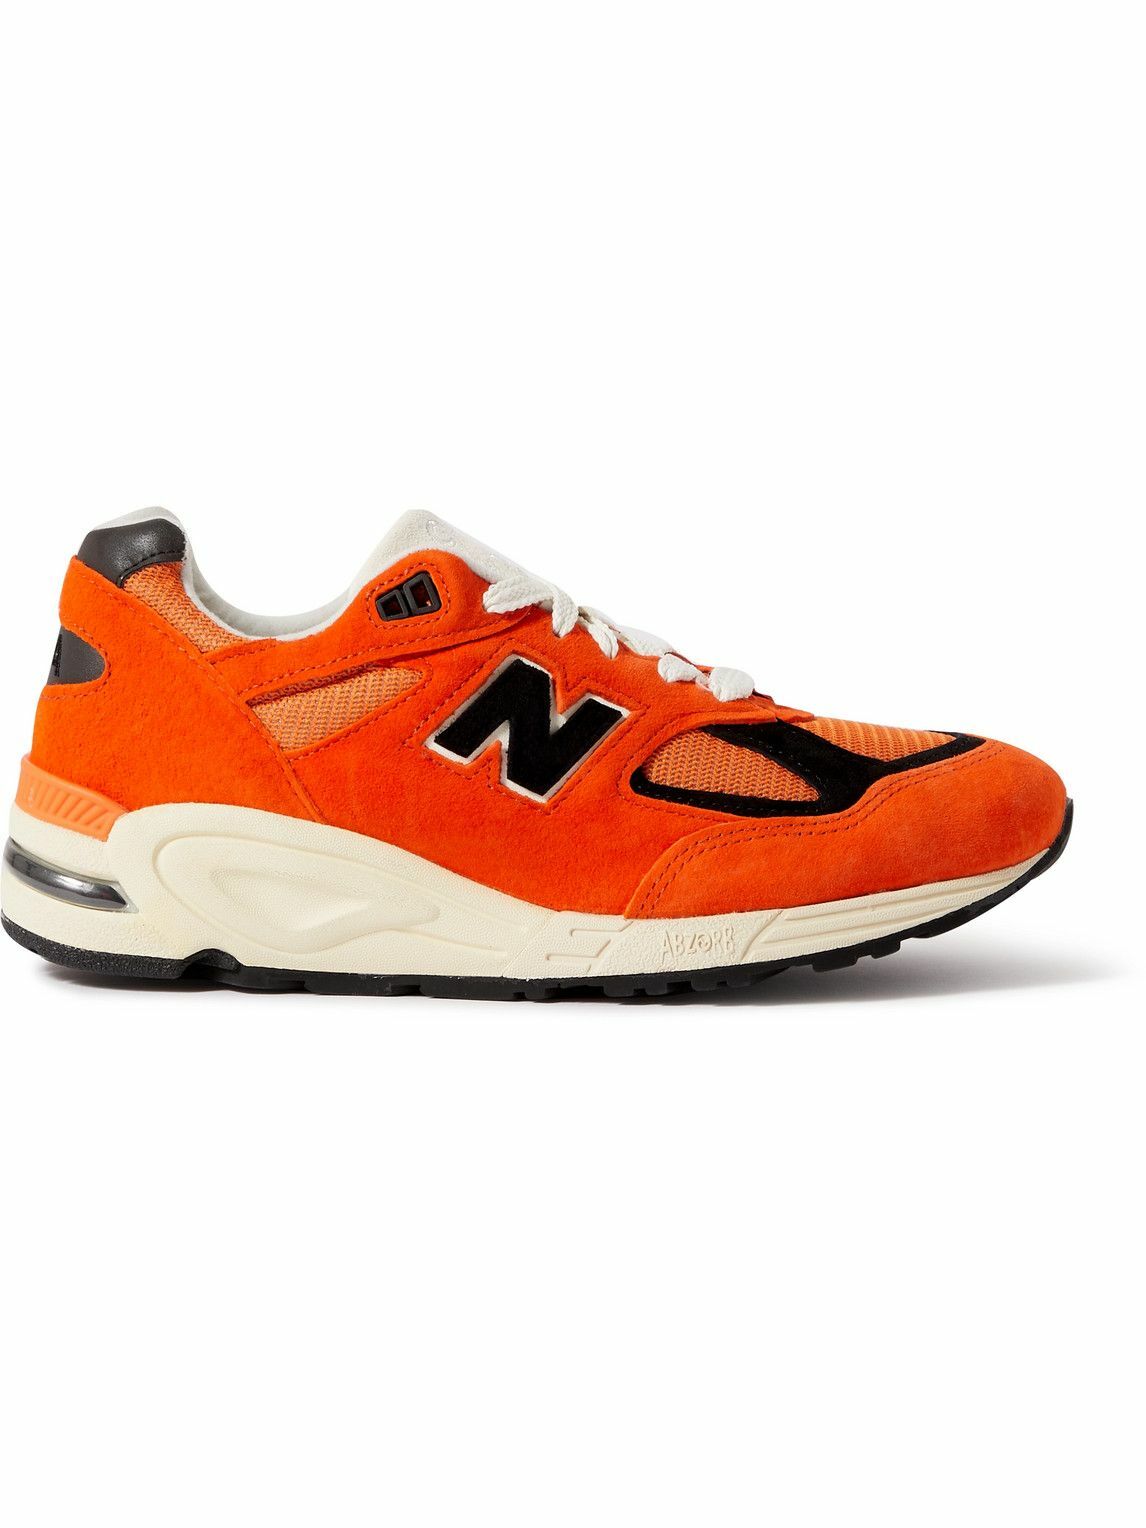 Photo: New Balance - Teddy Santis 990v2 Mesh and Suede Sneakers - Orange